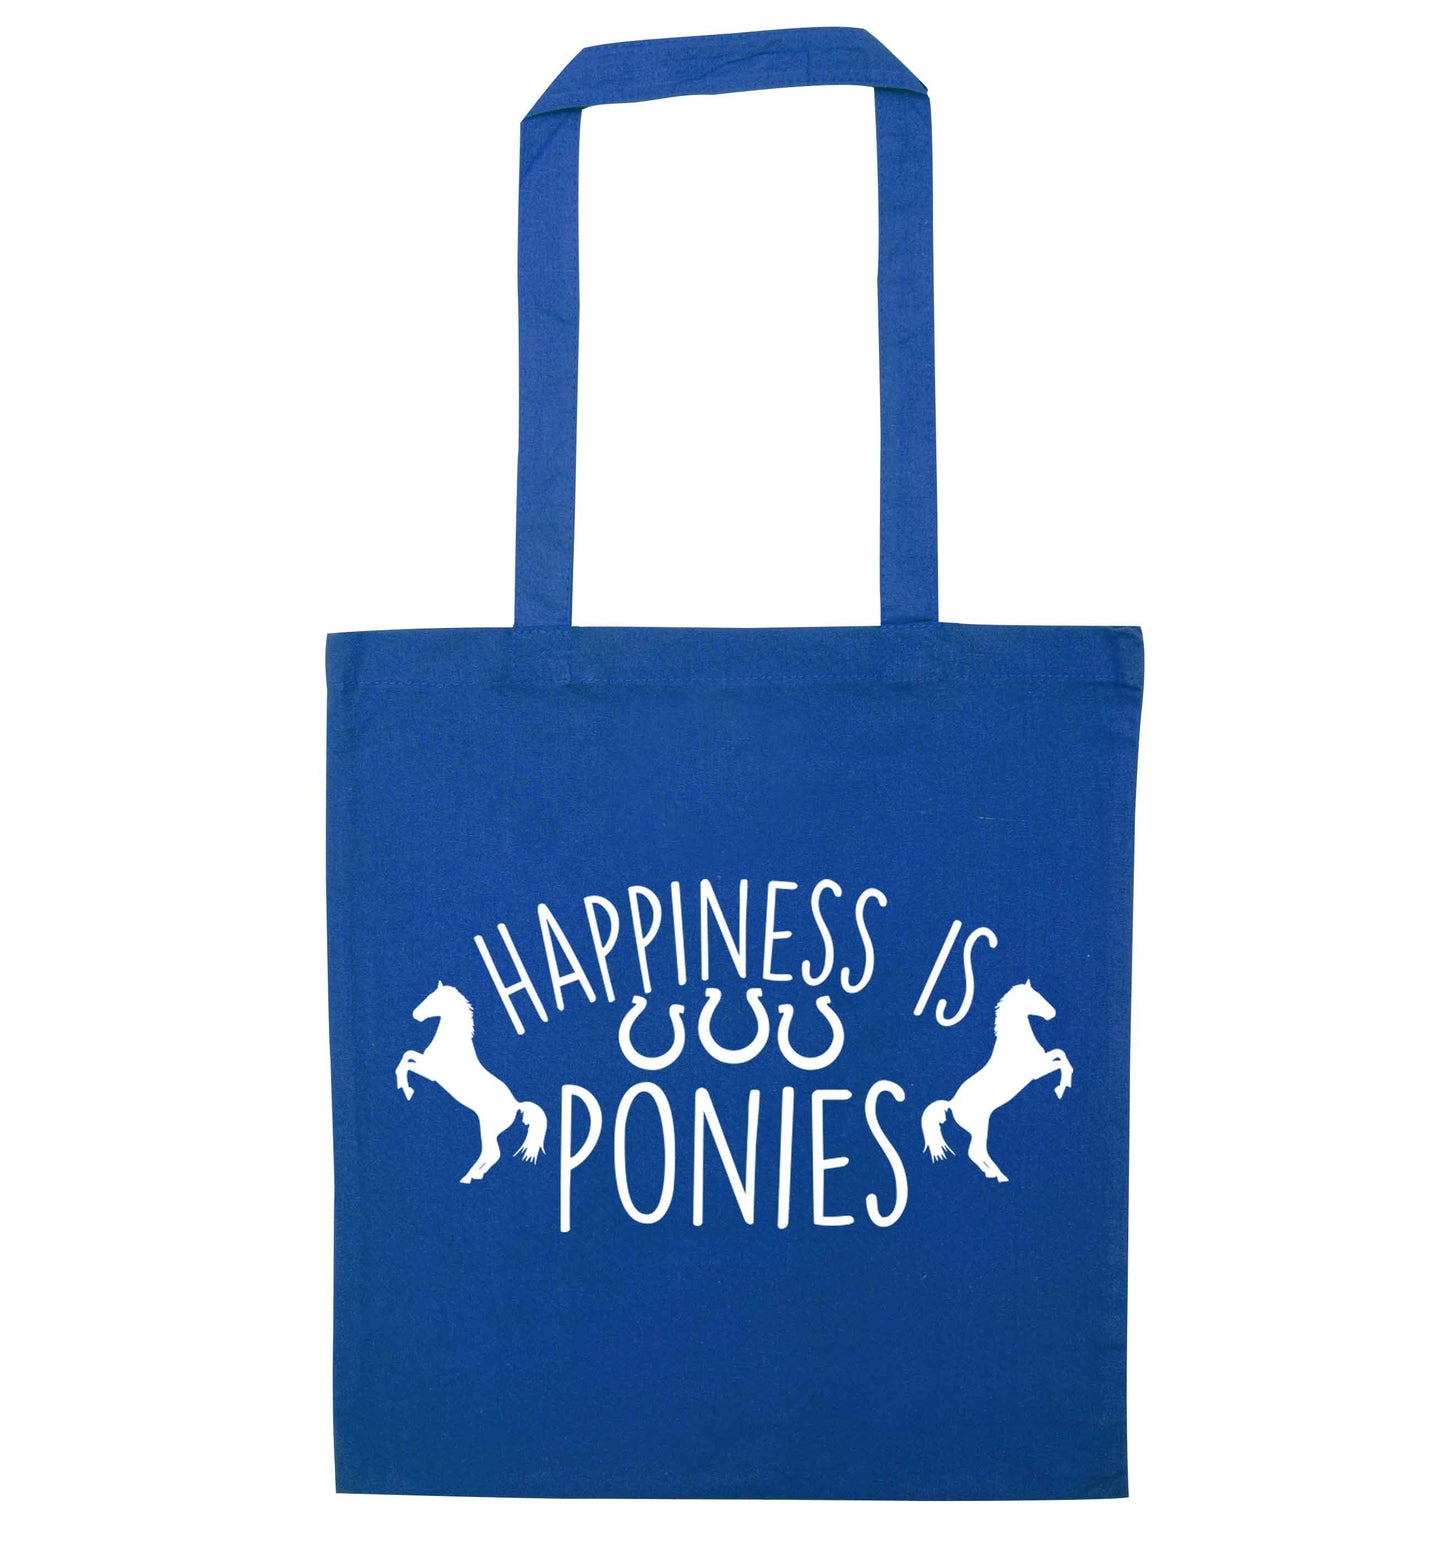 Happiness is ponies blue tote bag